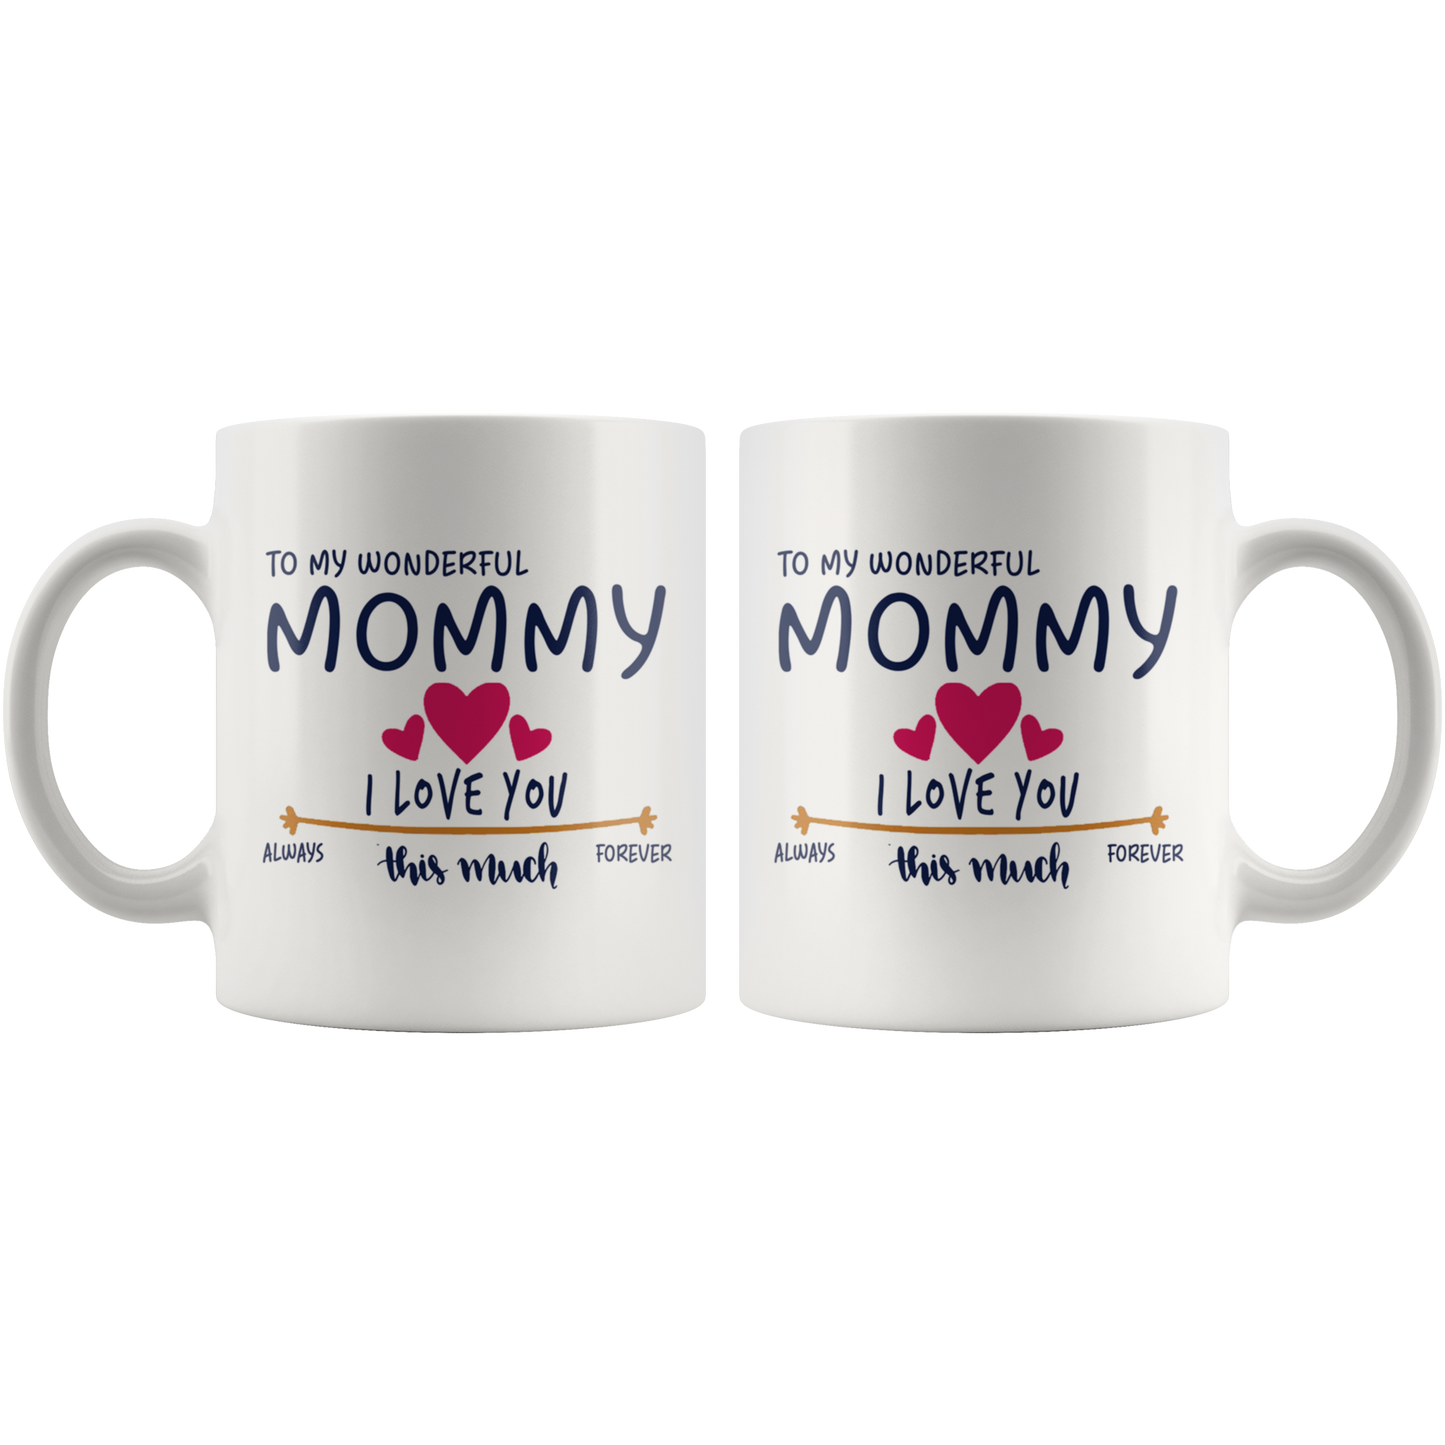 M-20470216-sp-23972 - [ Mommy | 1 ]Mom Day Gifts From Daughter or Son - To My Wonderful Mommy I